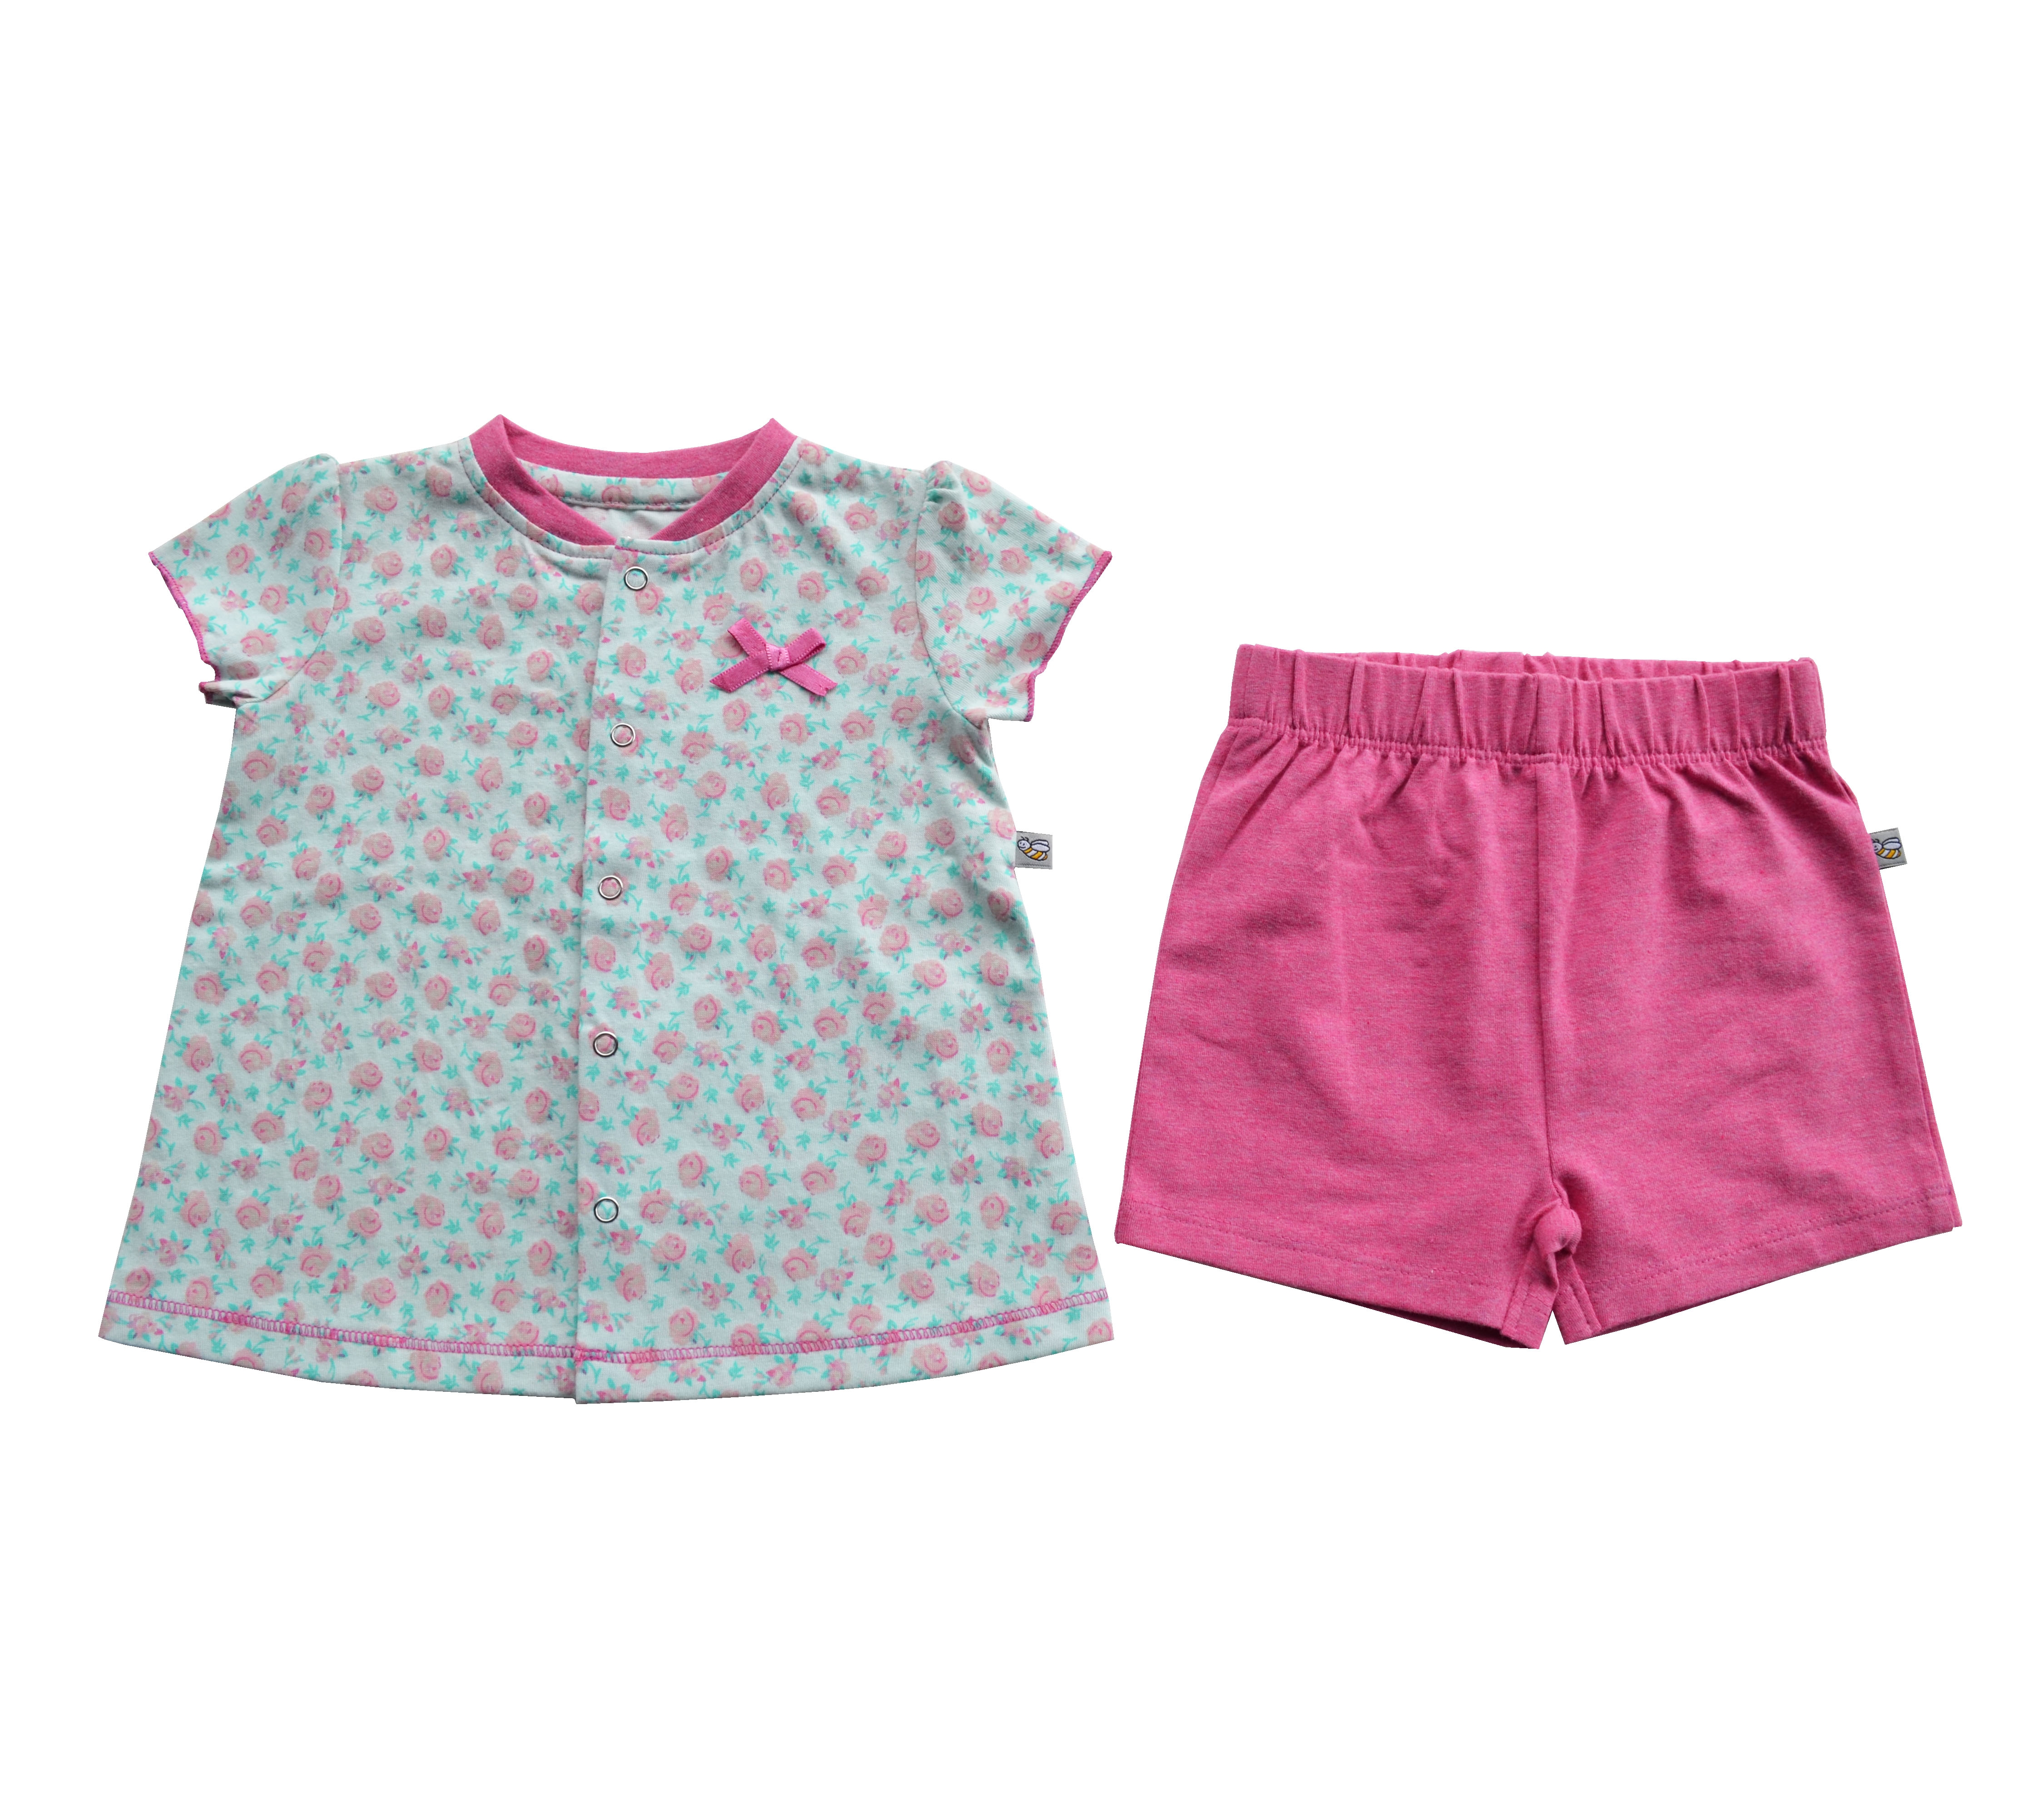 Babeez | Allover Flower Printed Green Top + Pink Shorty Set (100% Cotton Single Jersey) undefined